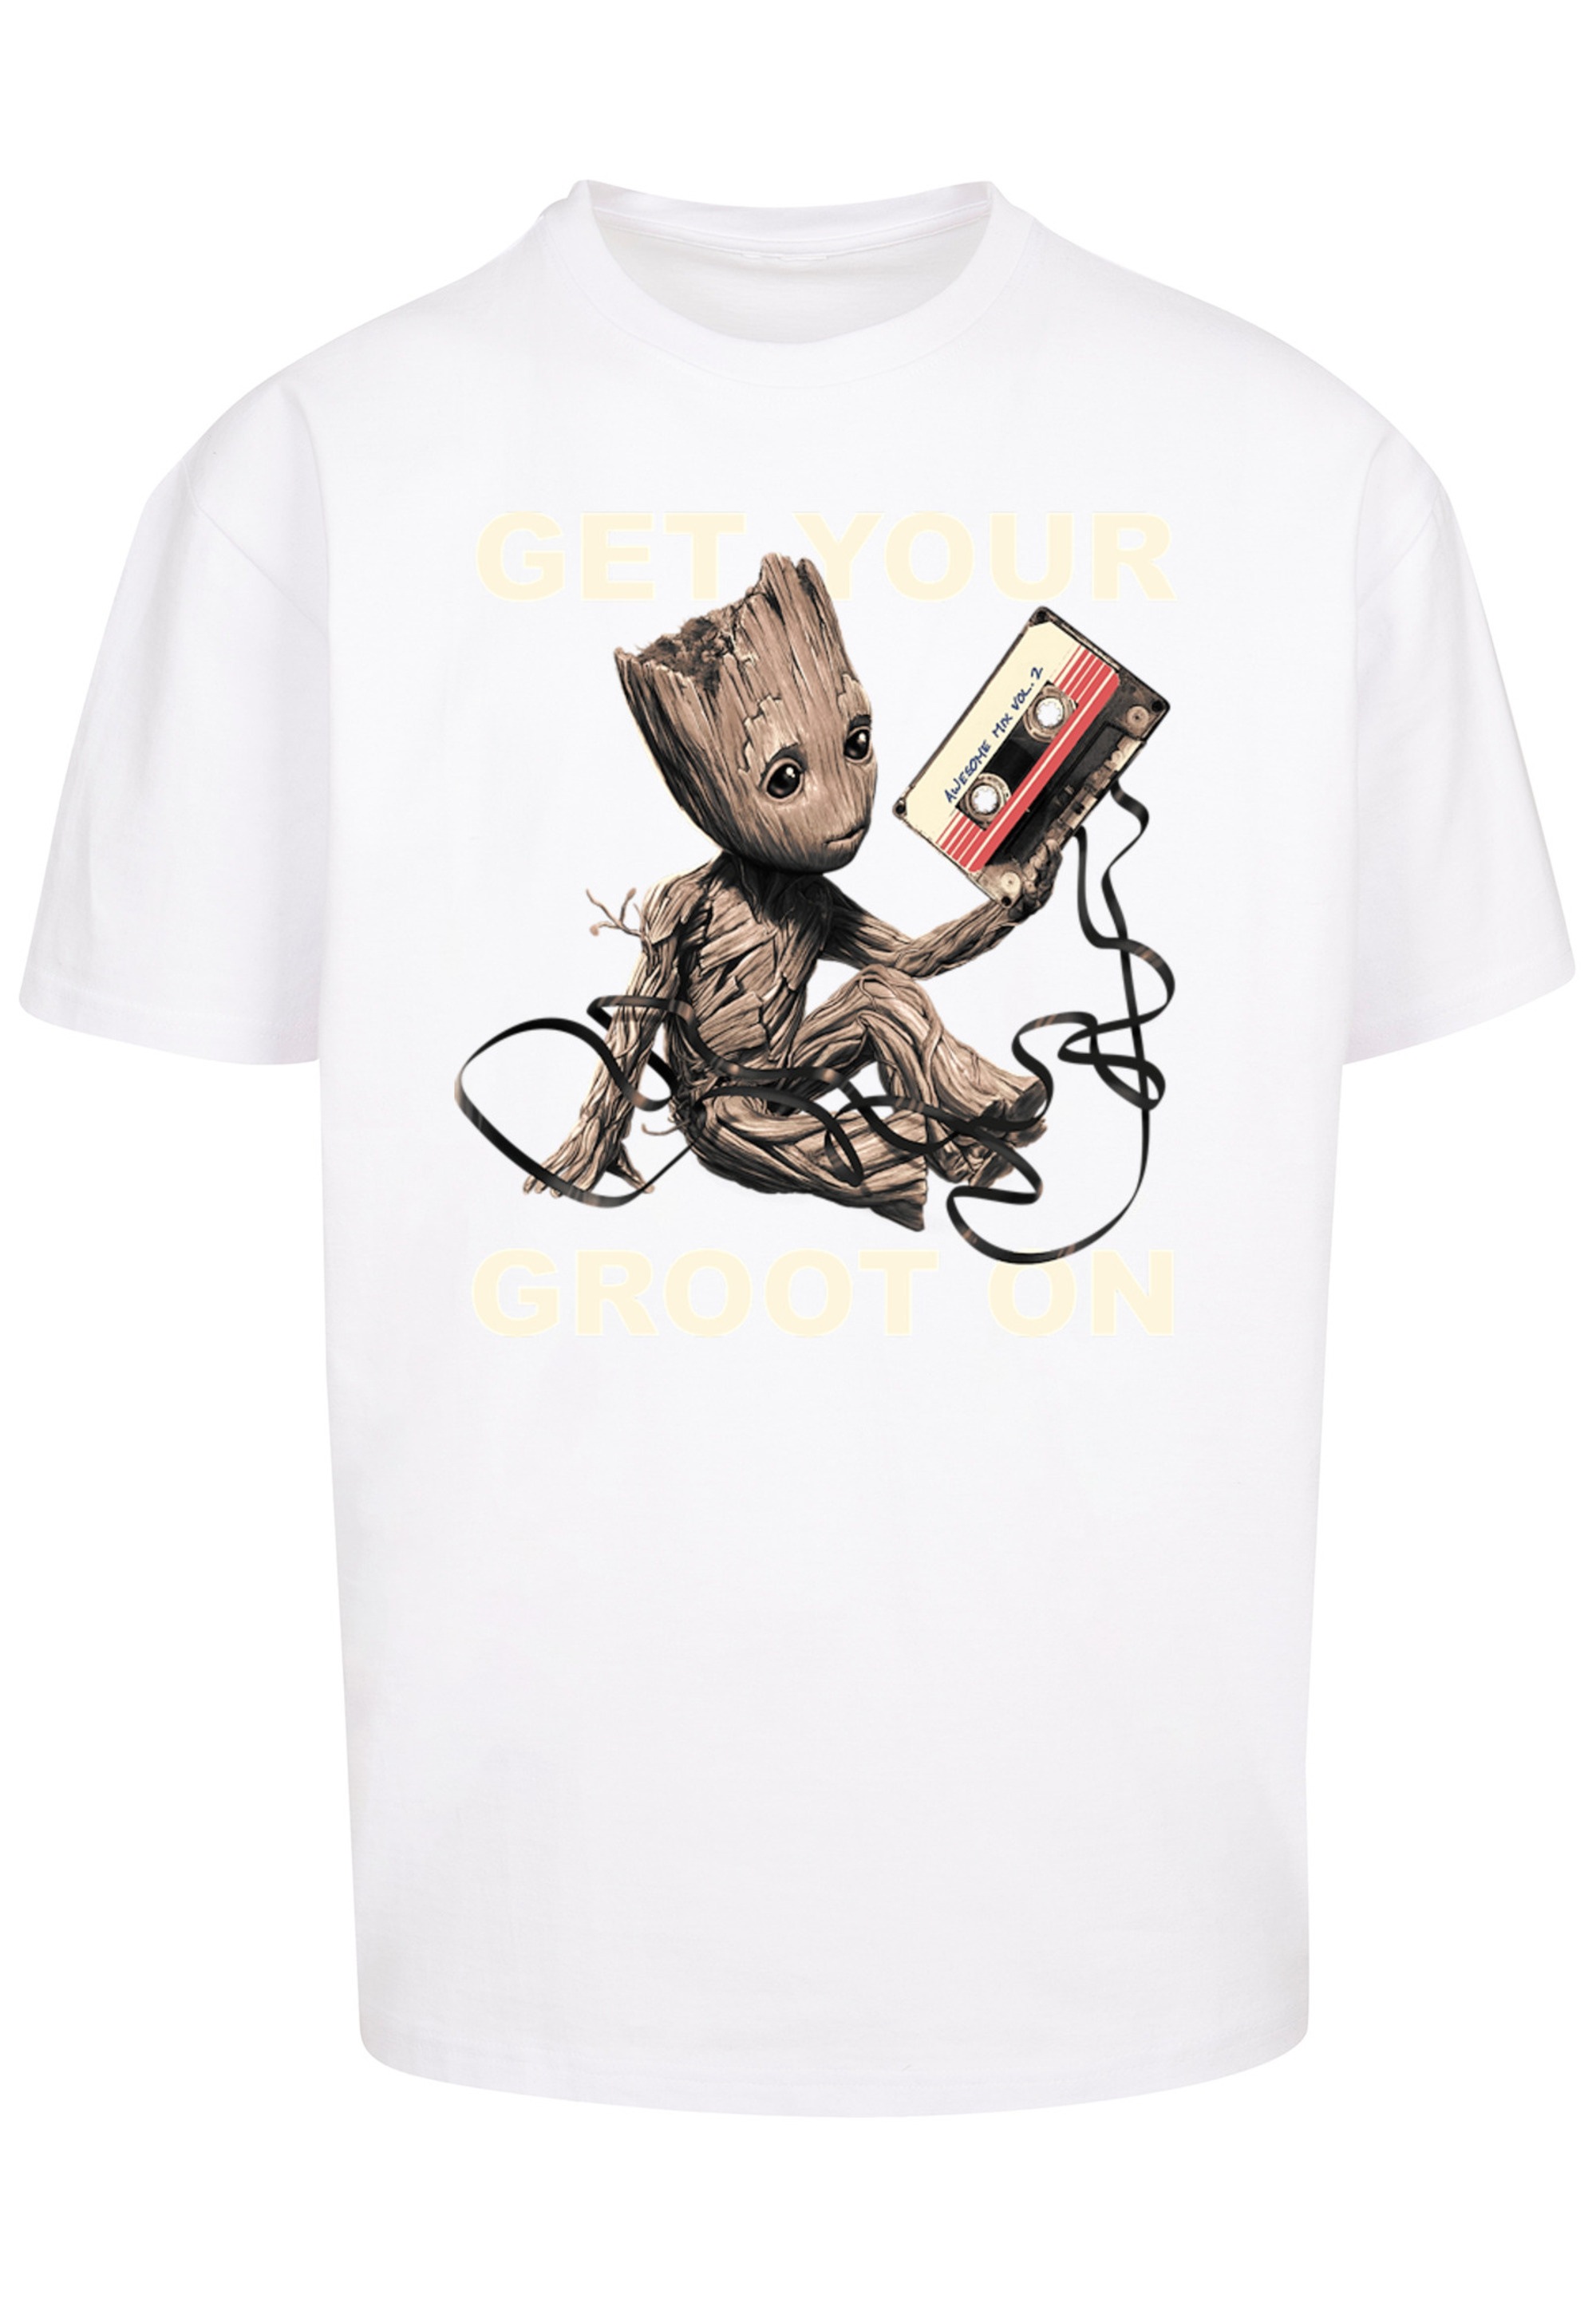 F4NT4STIC T-Shirt »Marvel Guardians of the Galaxy Get your Groot On«, Print